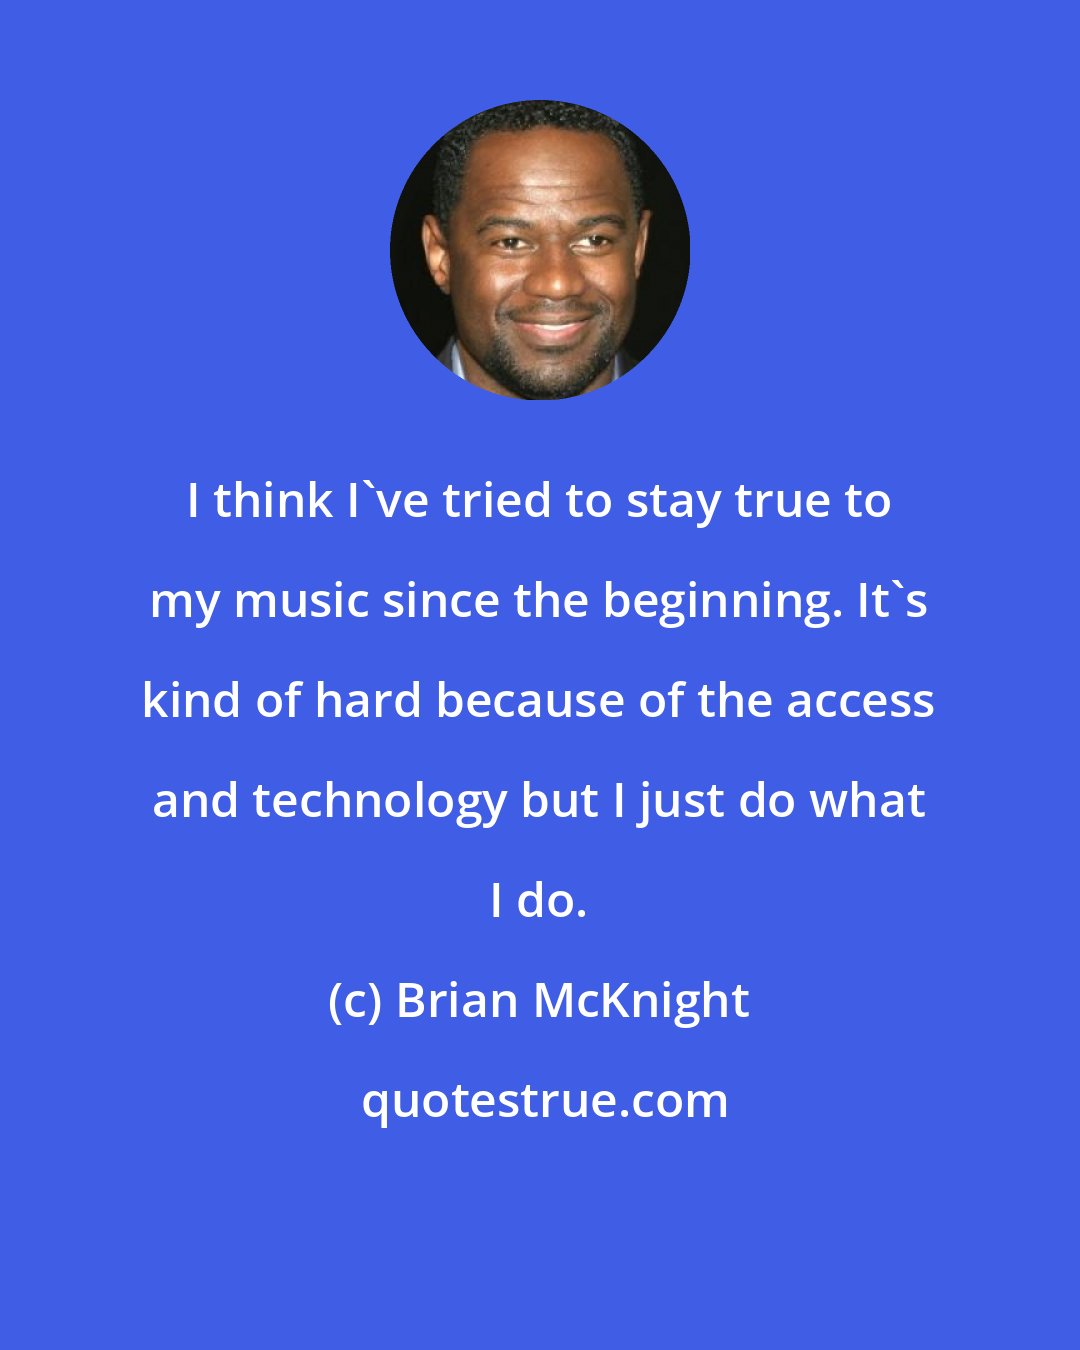 Brian McKnight: I think I've tried to stay true to my music since the beginning. It's kind of hard because of the access and technology but I just do what I do.